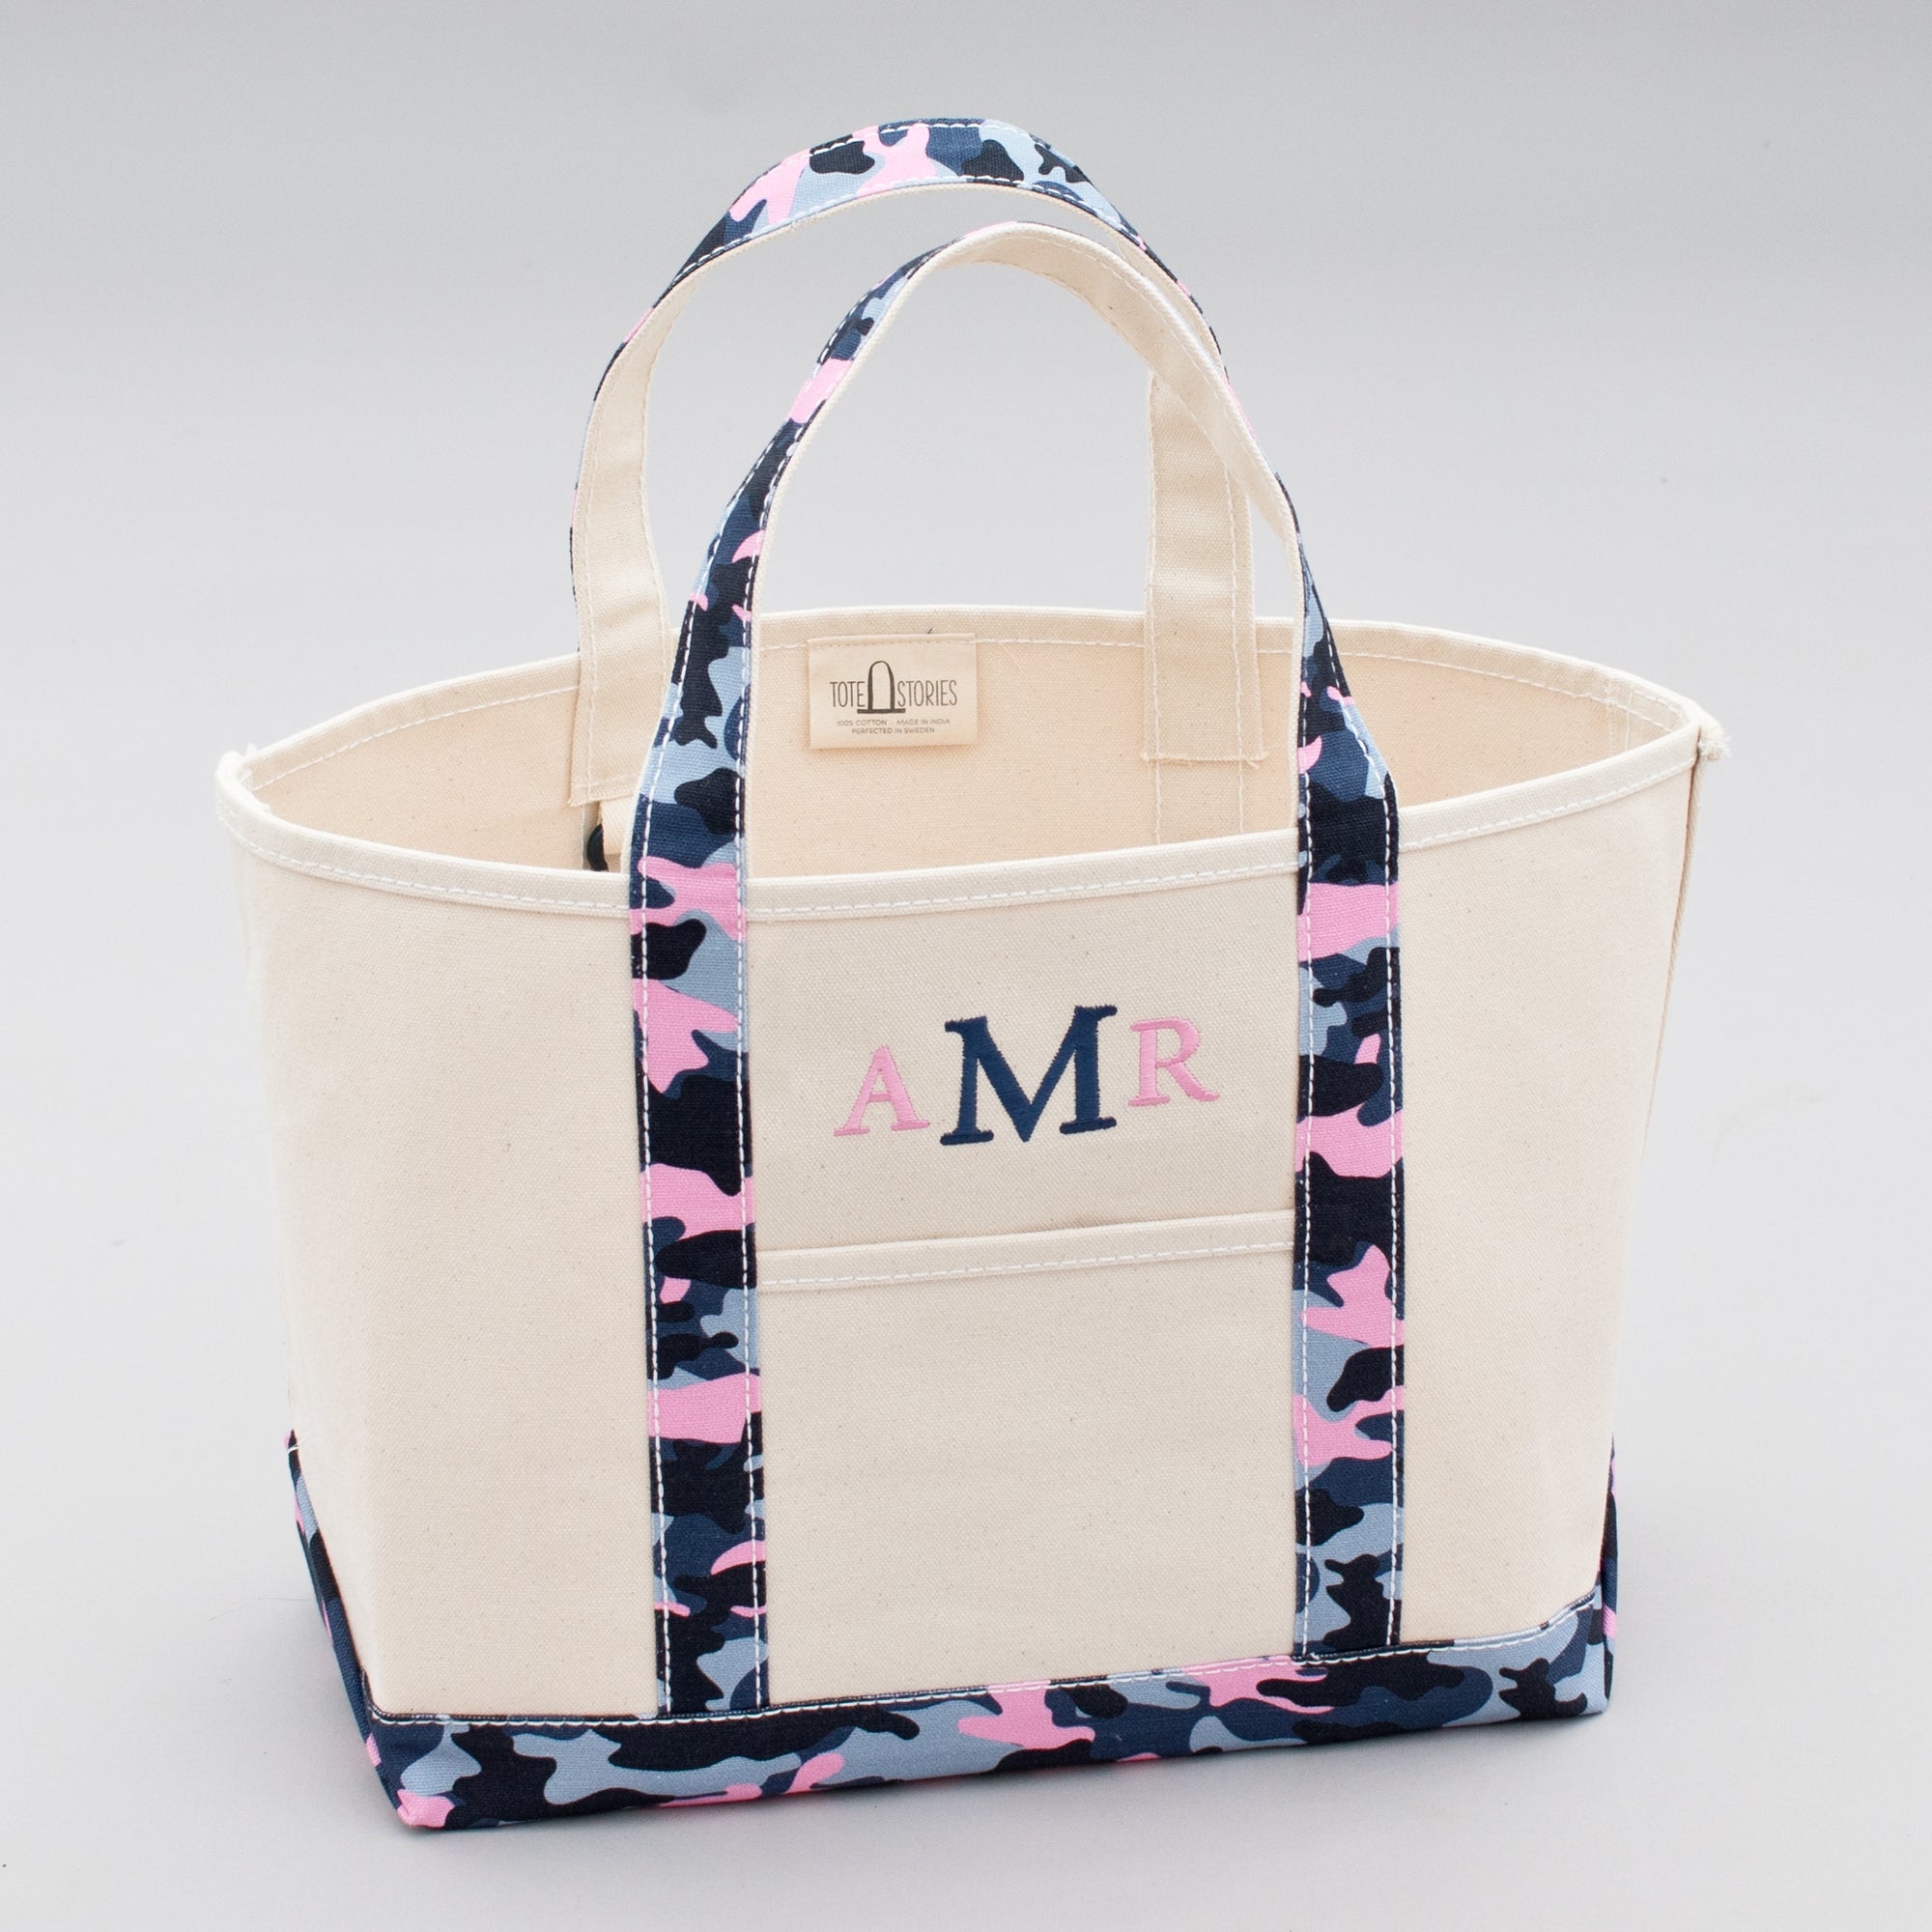 Limited Tote Bag - Camo Falsterbo Sky - Front